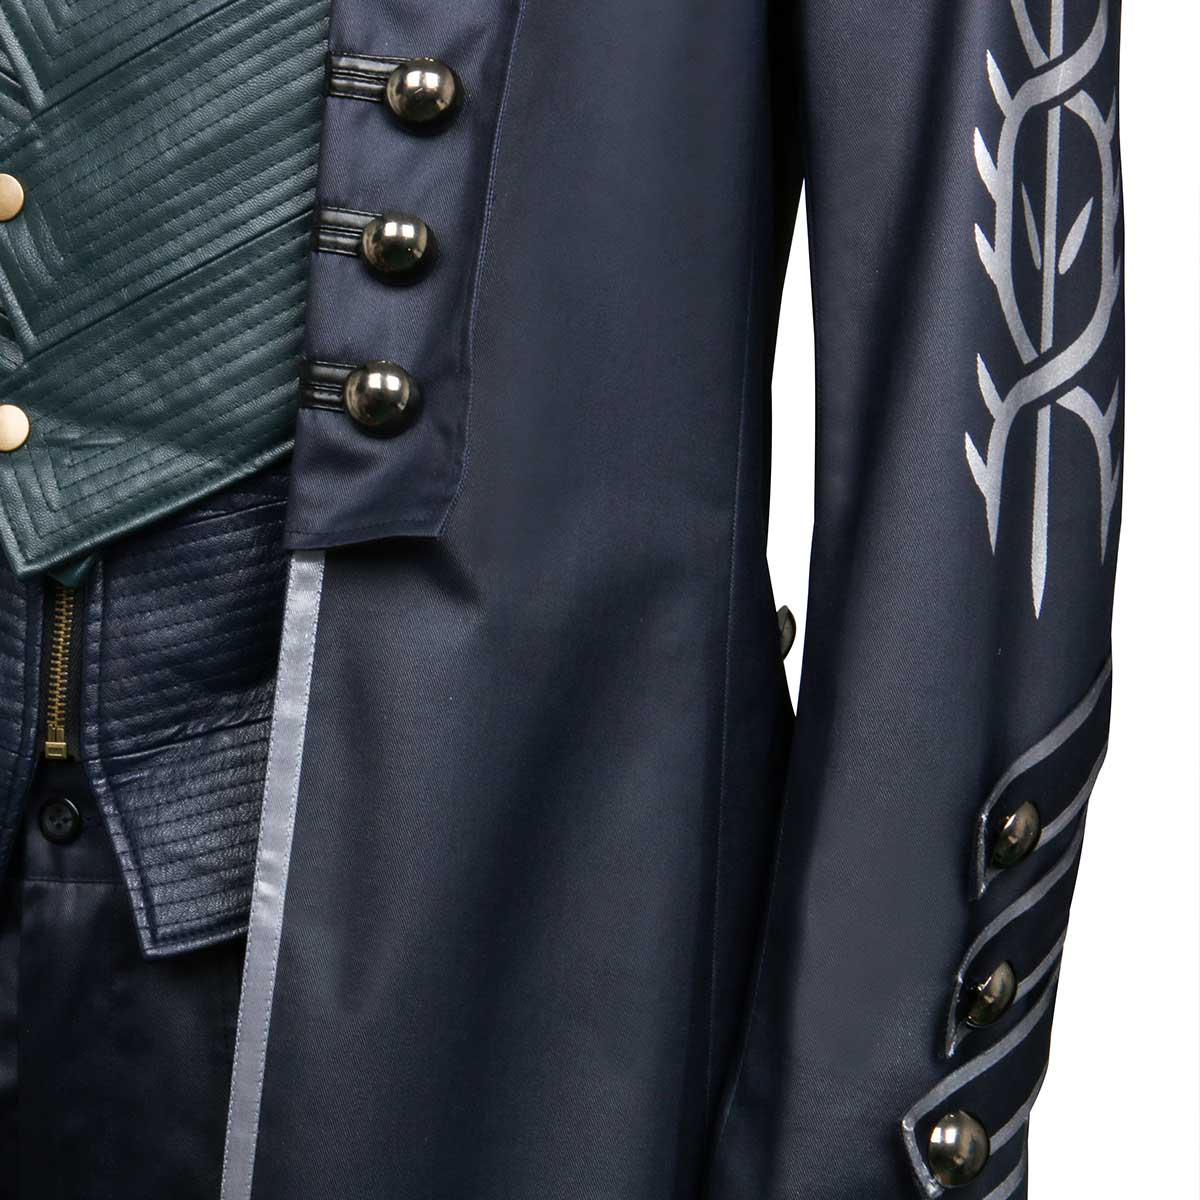 Devil May Cry5 Vergil Cosplay Costume Men Coat Whole Set Suit